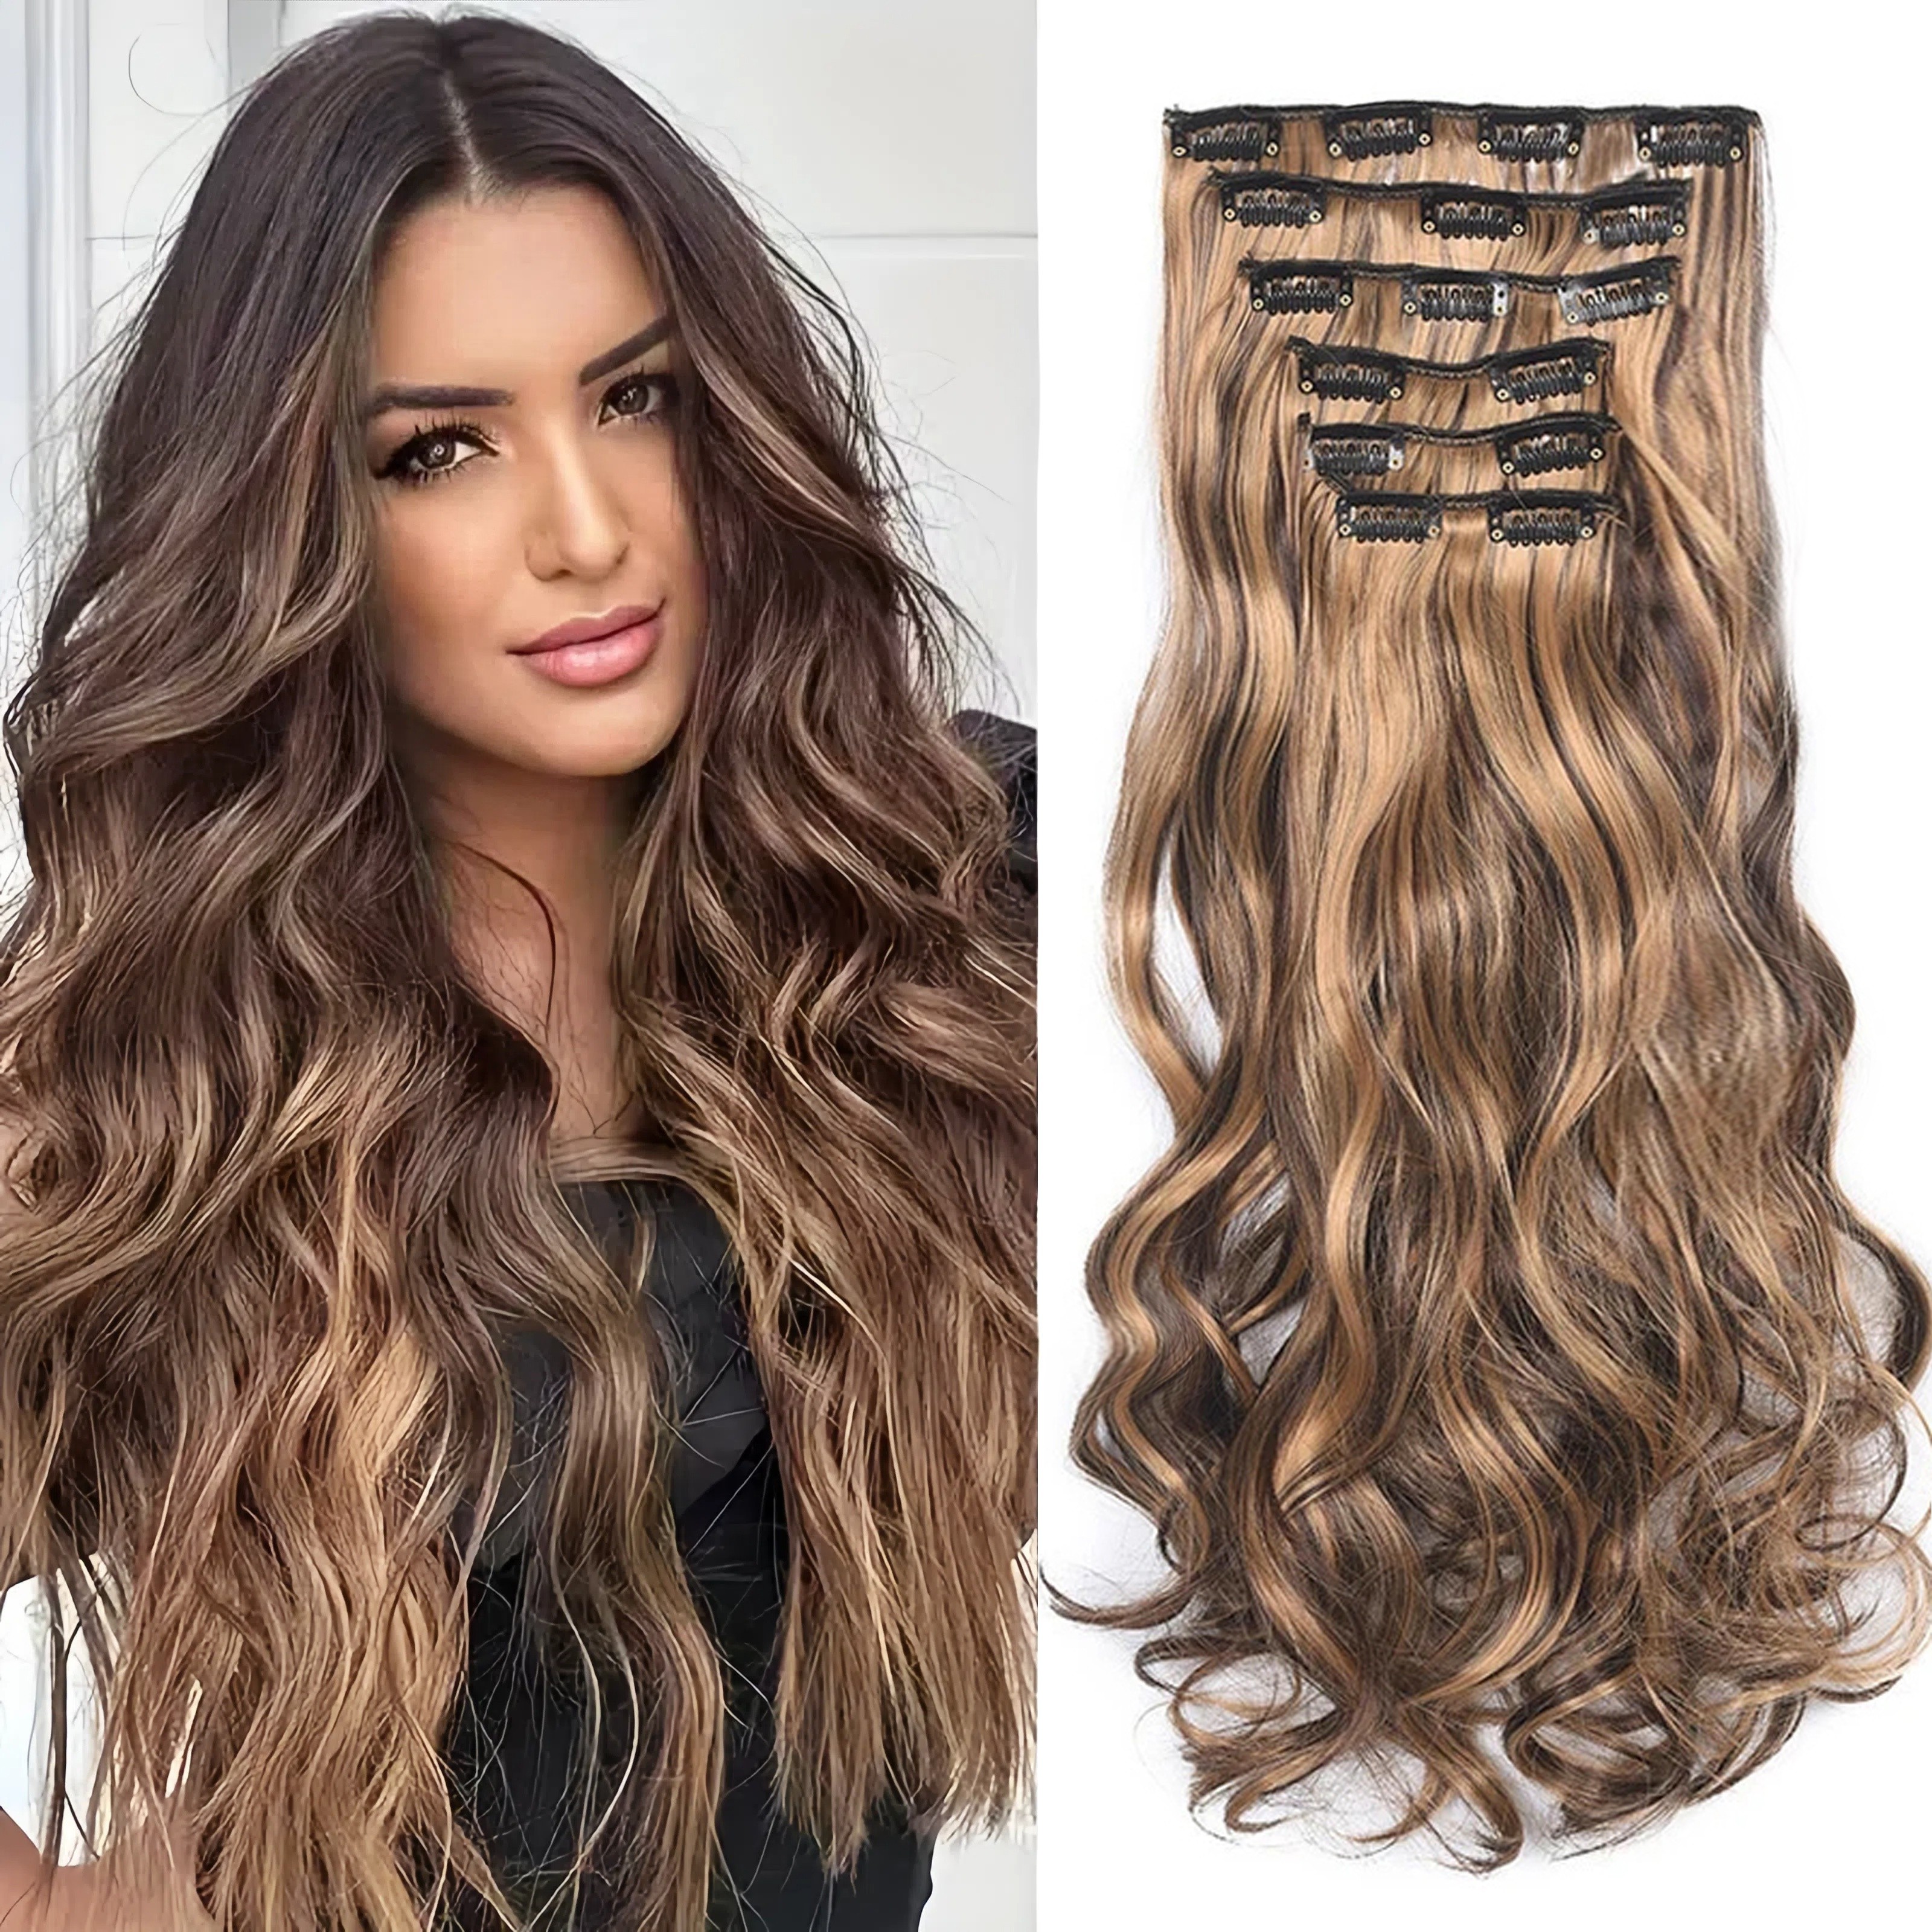 

Clip-in Curly Hair Extension, Heat Resistant, Multi-tone, Basic Shades For All Women Holiday Wear Hairpiece